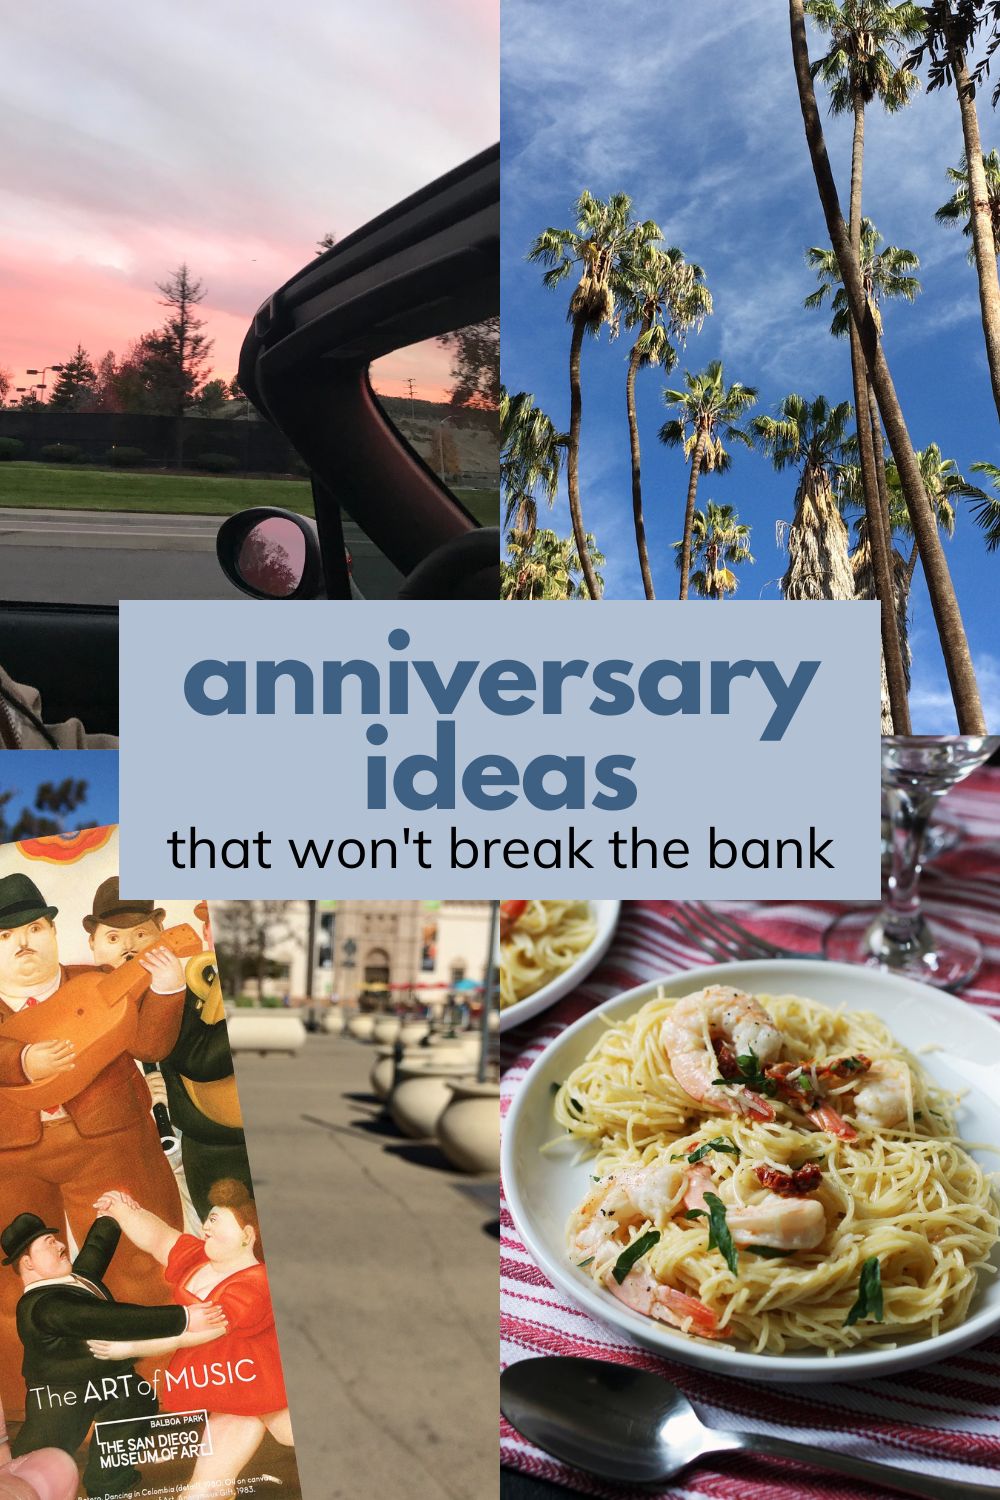 collage of anniversary ideas that won't break the bank.